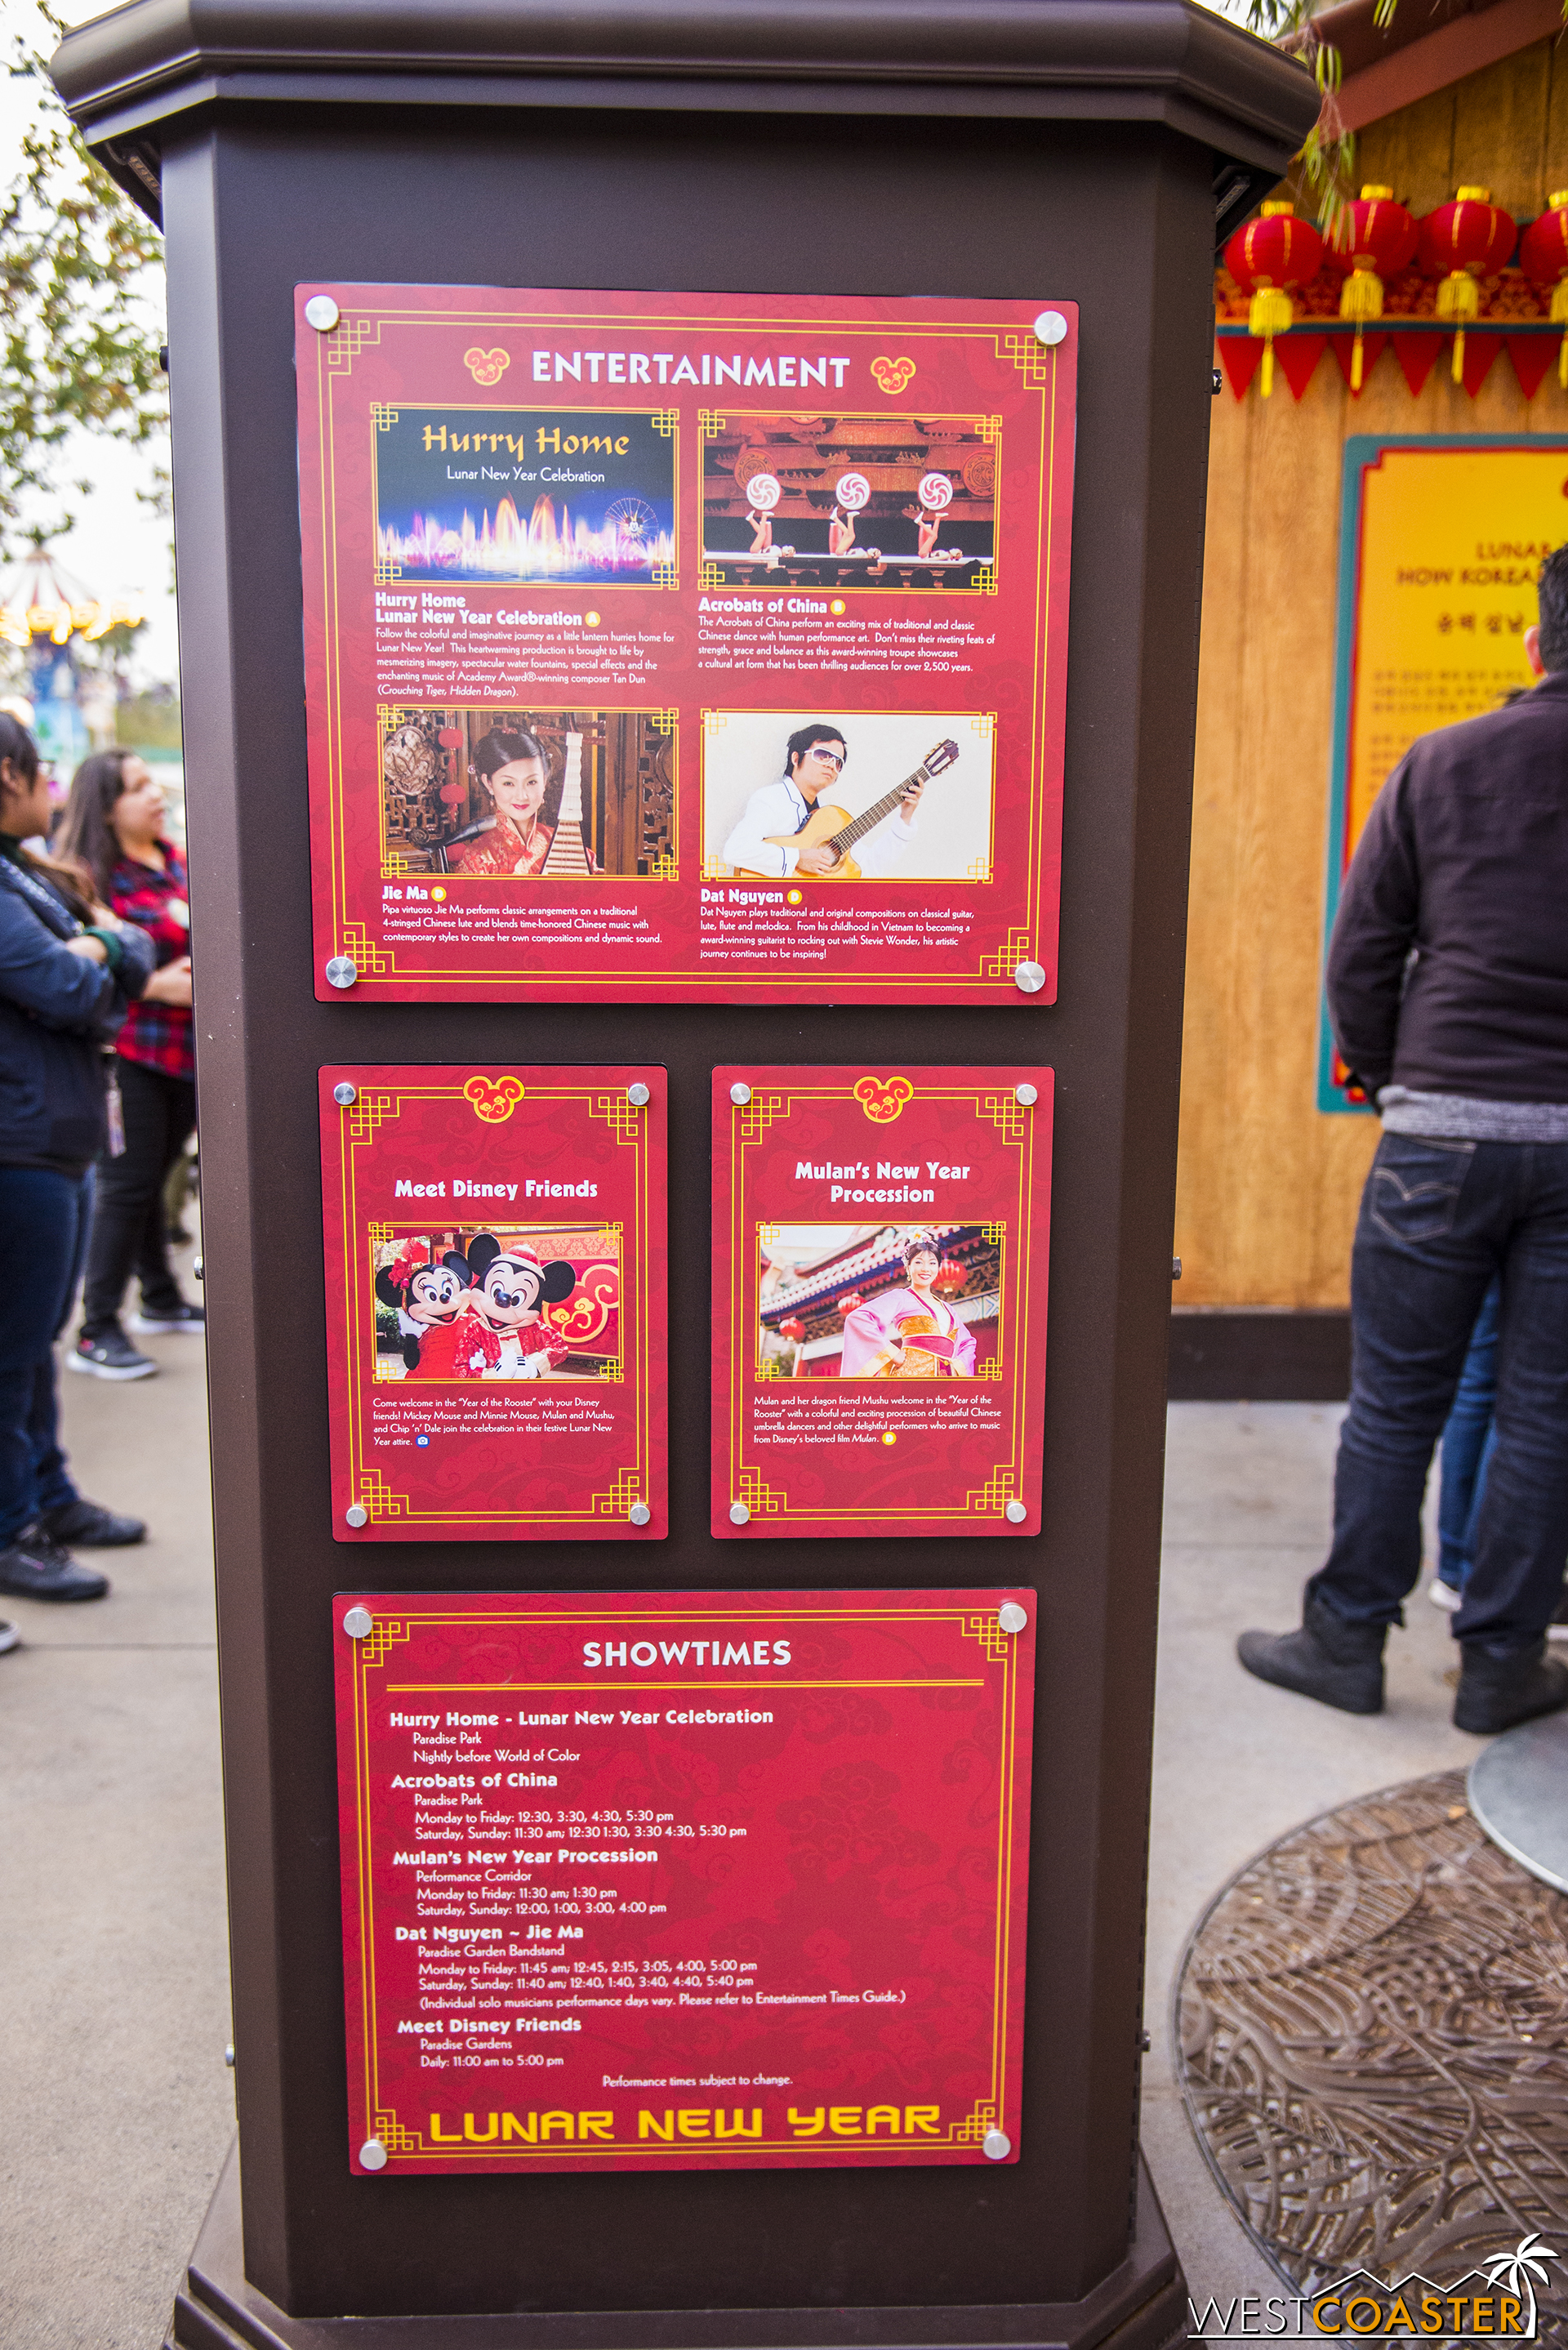  Descriptions of the entertainment can be found at every Lunar New Year Marketplace, adjacent to the food menu sides.   